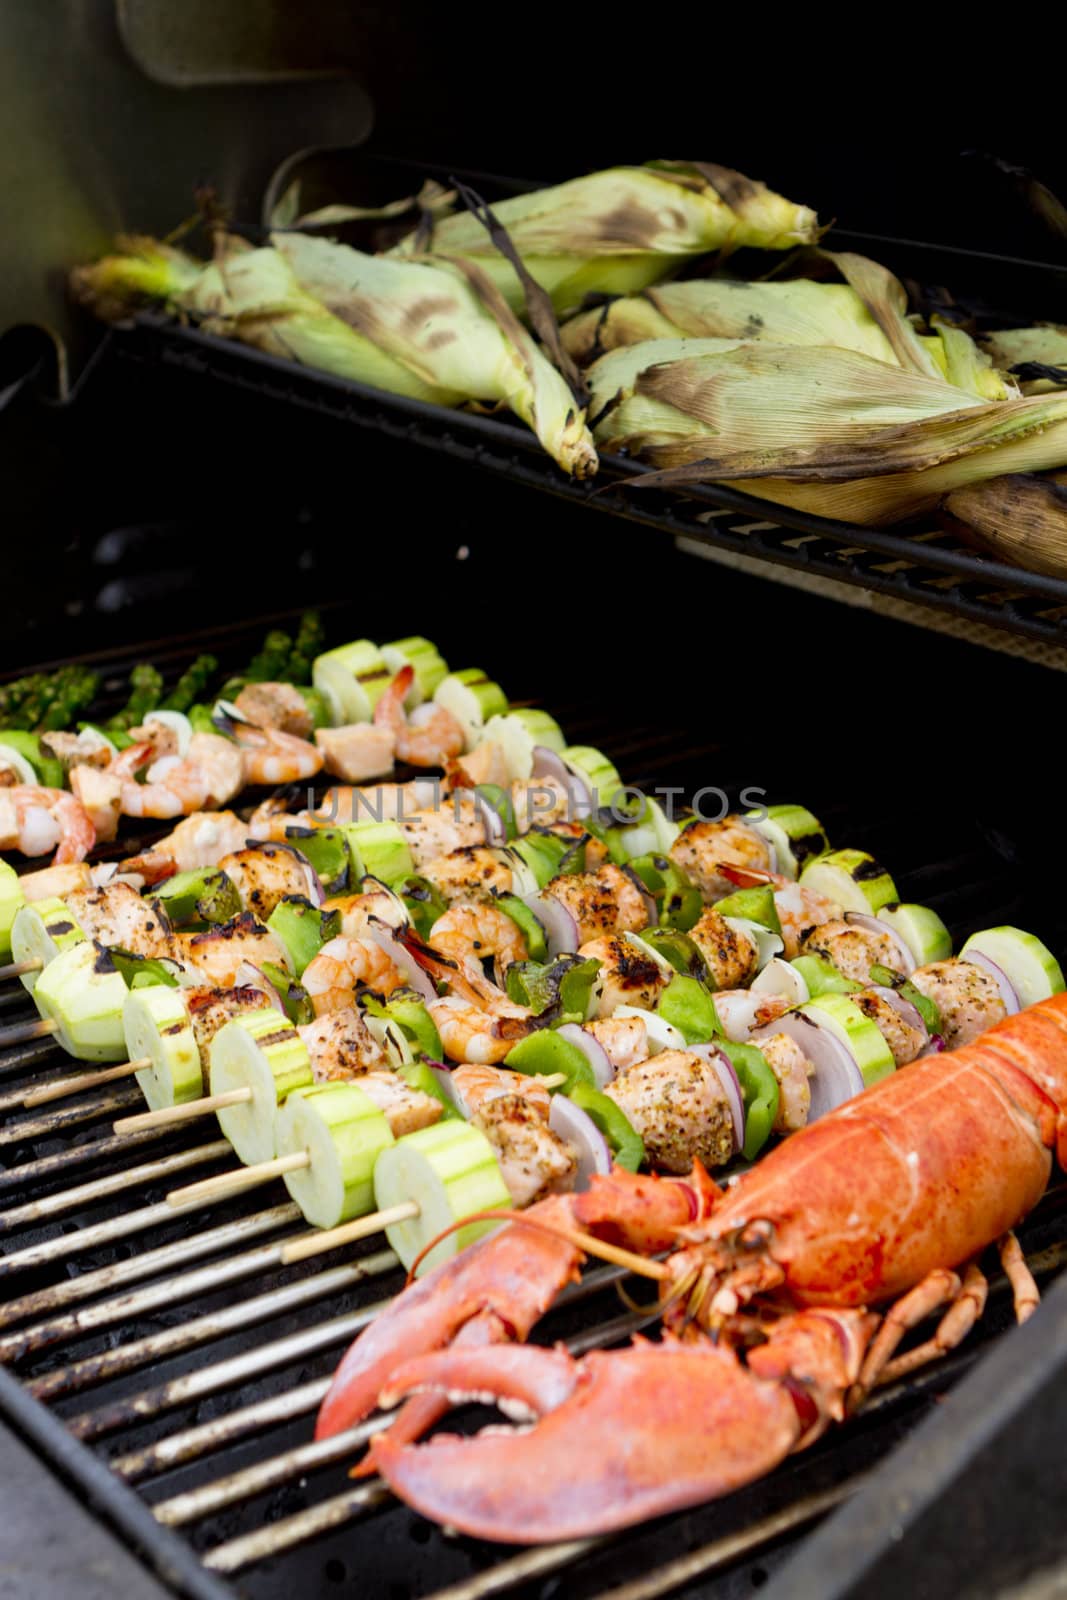 Seafood Barbecue with Cornstalks by coskun